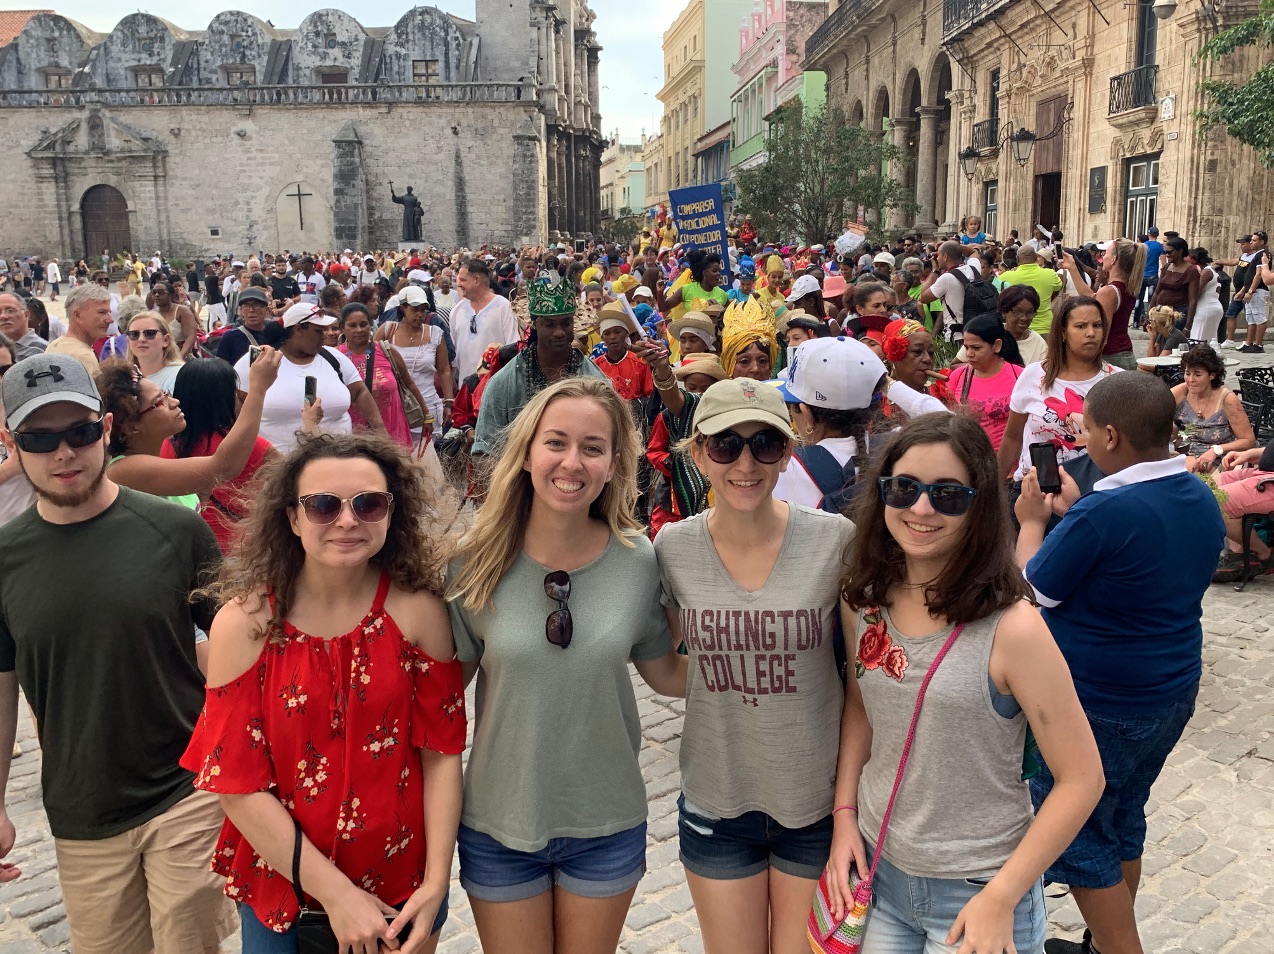 Cuba - Plaza with students